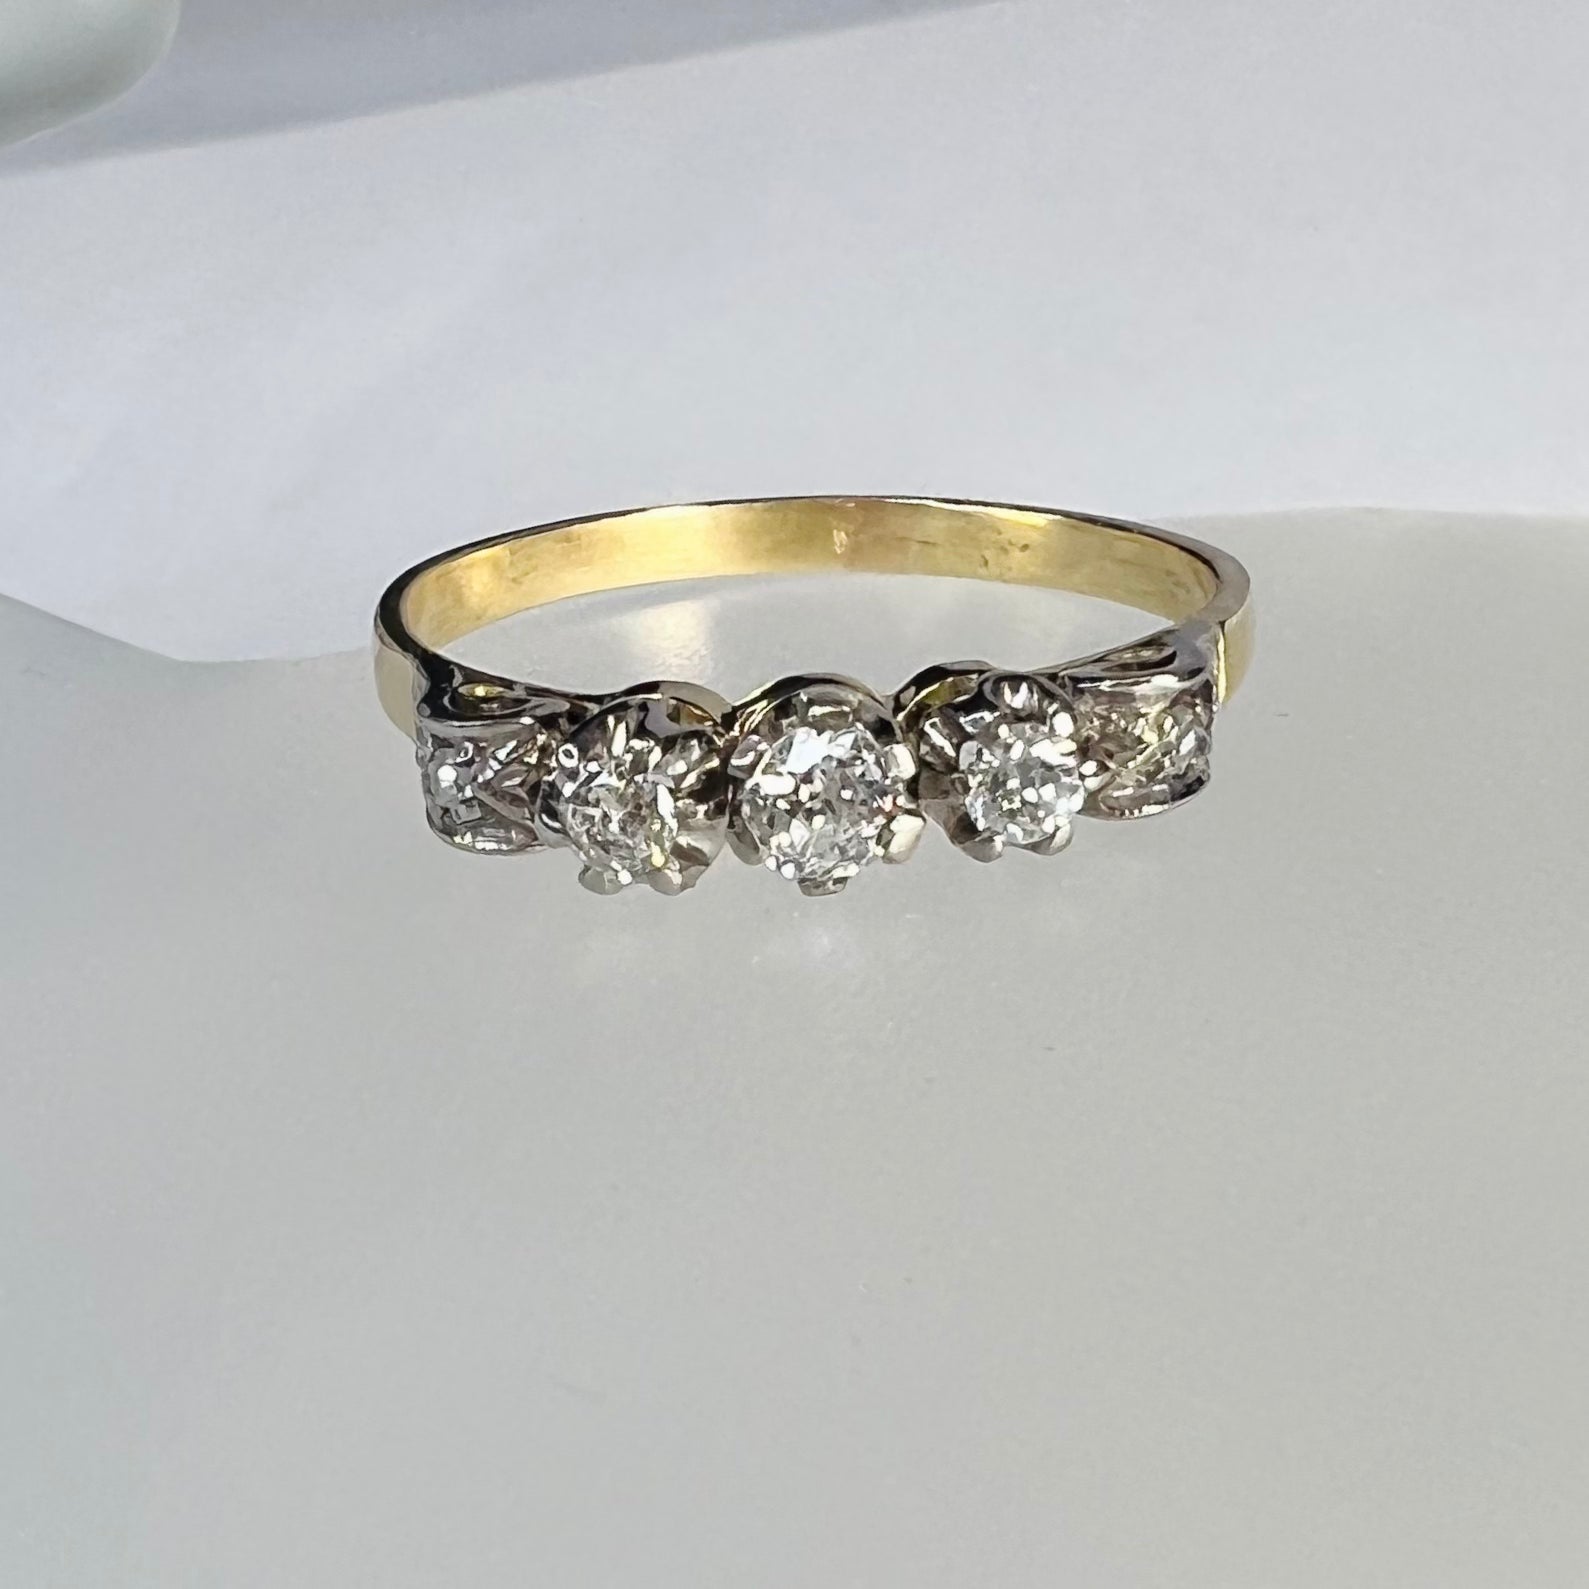 Antique 18K Yellow Gold Diamond .30ctw Engraved Ring Size 9.25